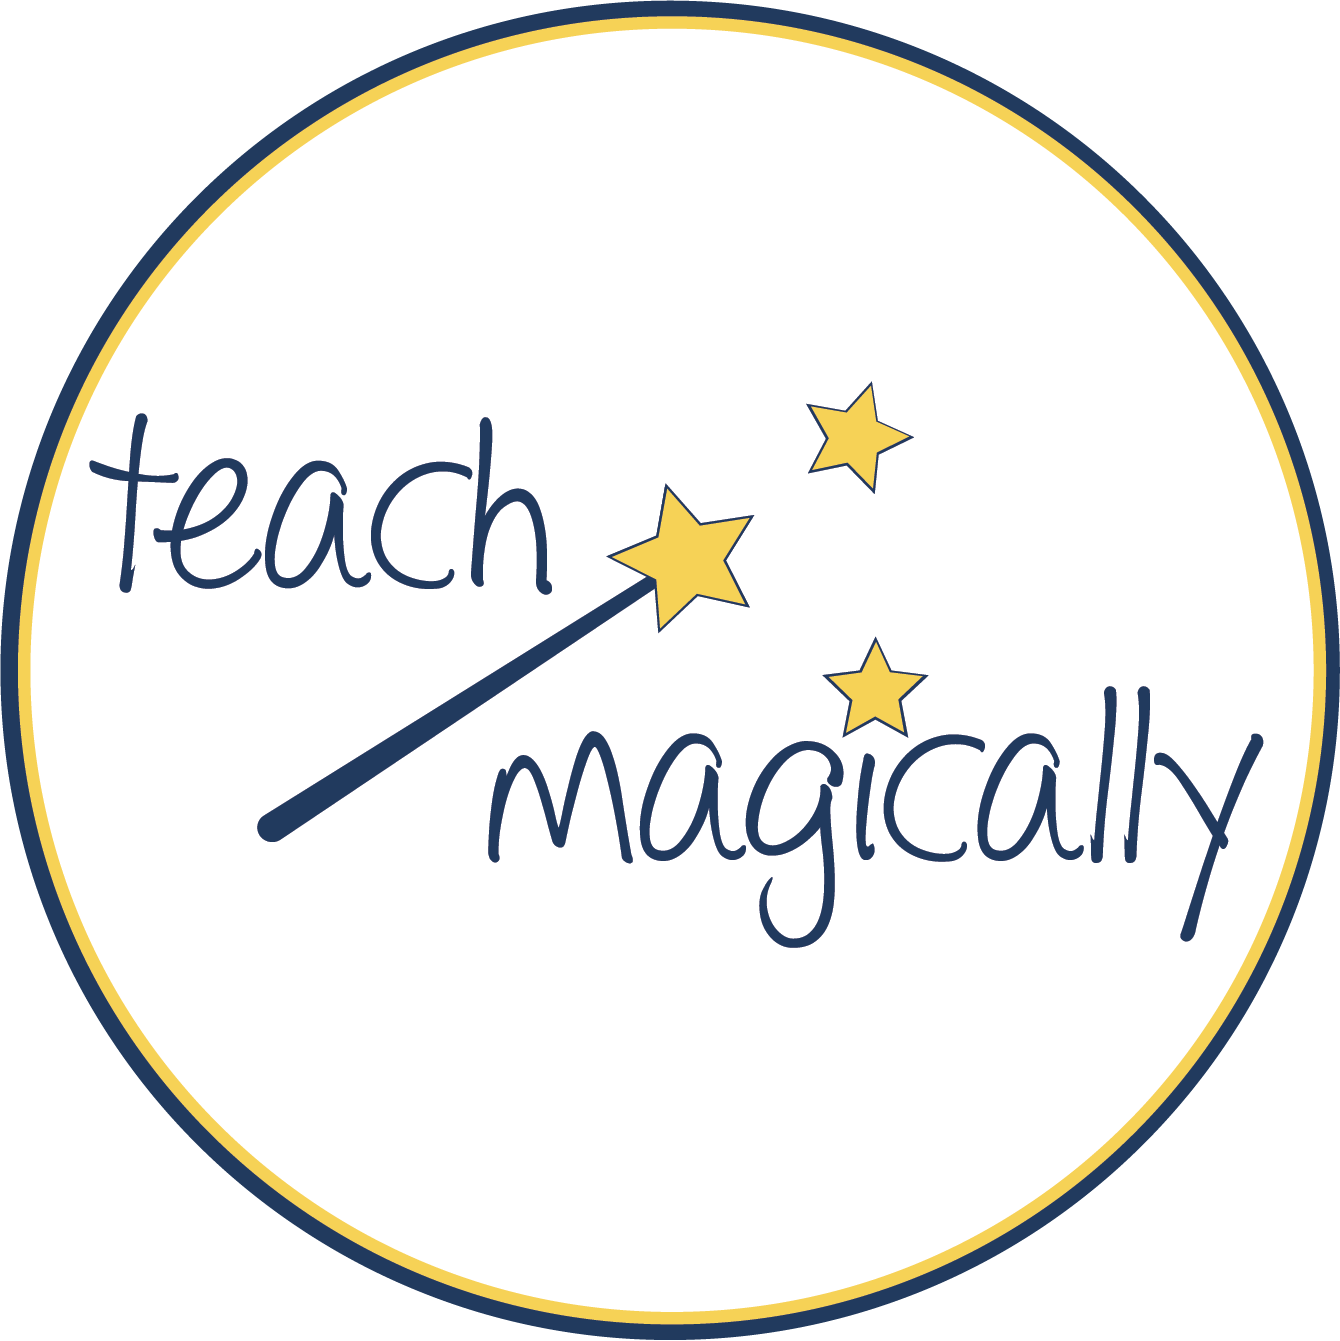 Teach Magically offers teaching resources for the primary grades.